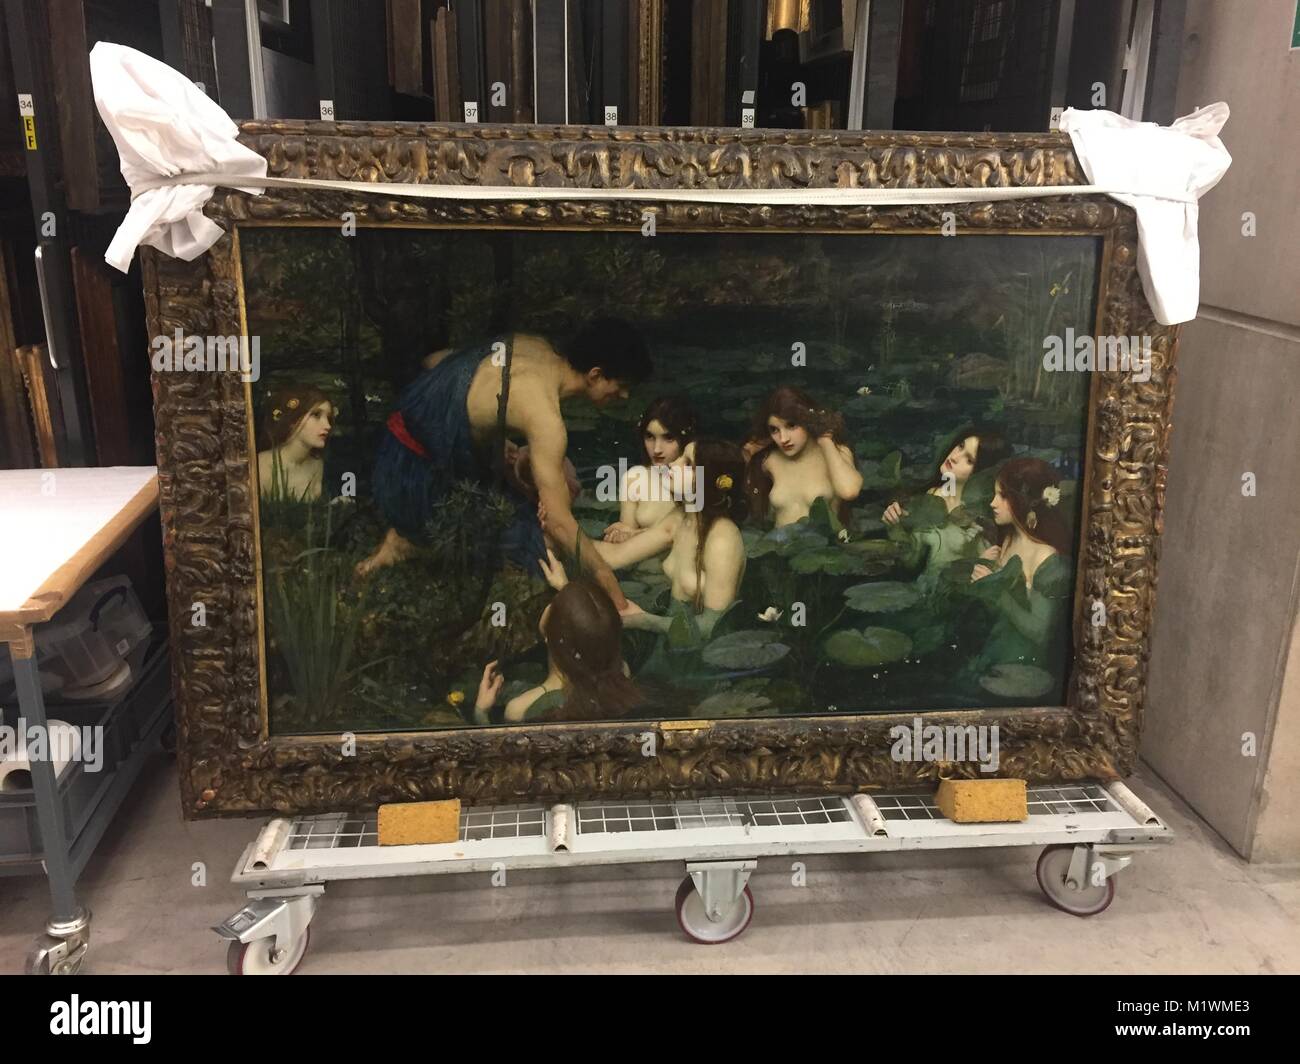 Manchester, England, 02 Febuary 2018. The painting 'Hylas and the Nymphs' (1896) by John William Waterhouse standing in the storeroom of the Manchester Art Gallery in Manchester, England, 02 Febuary 2018. The art gallery removed this painting from its exhibition due to its depiction of women - triggering a storm of indignation. Photo: Britta Schultejans/dpa Credit: dpa picture alliance/Alamy Live News Stock Photo